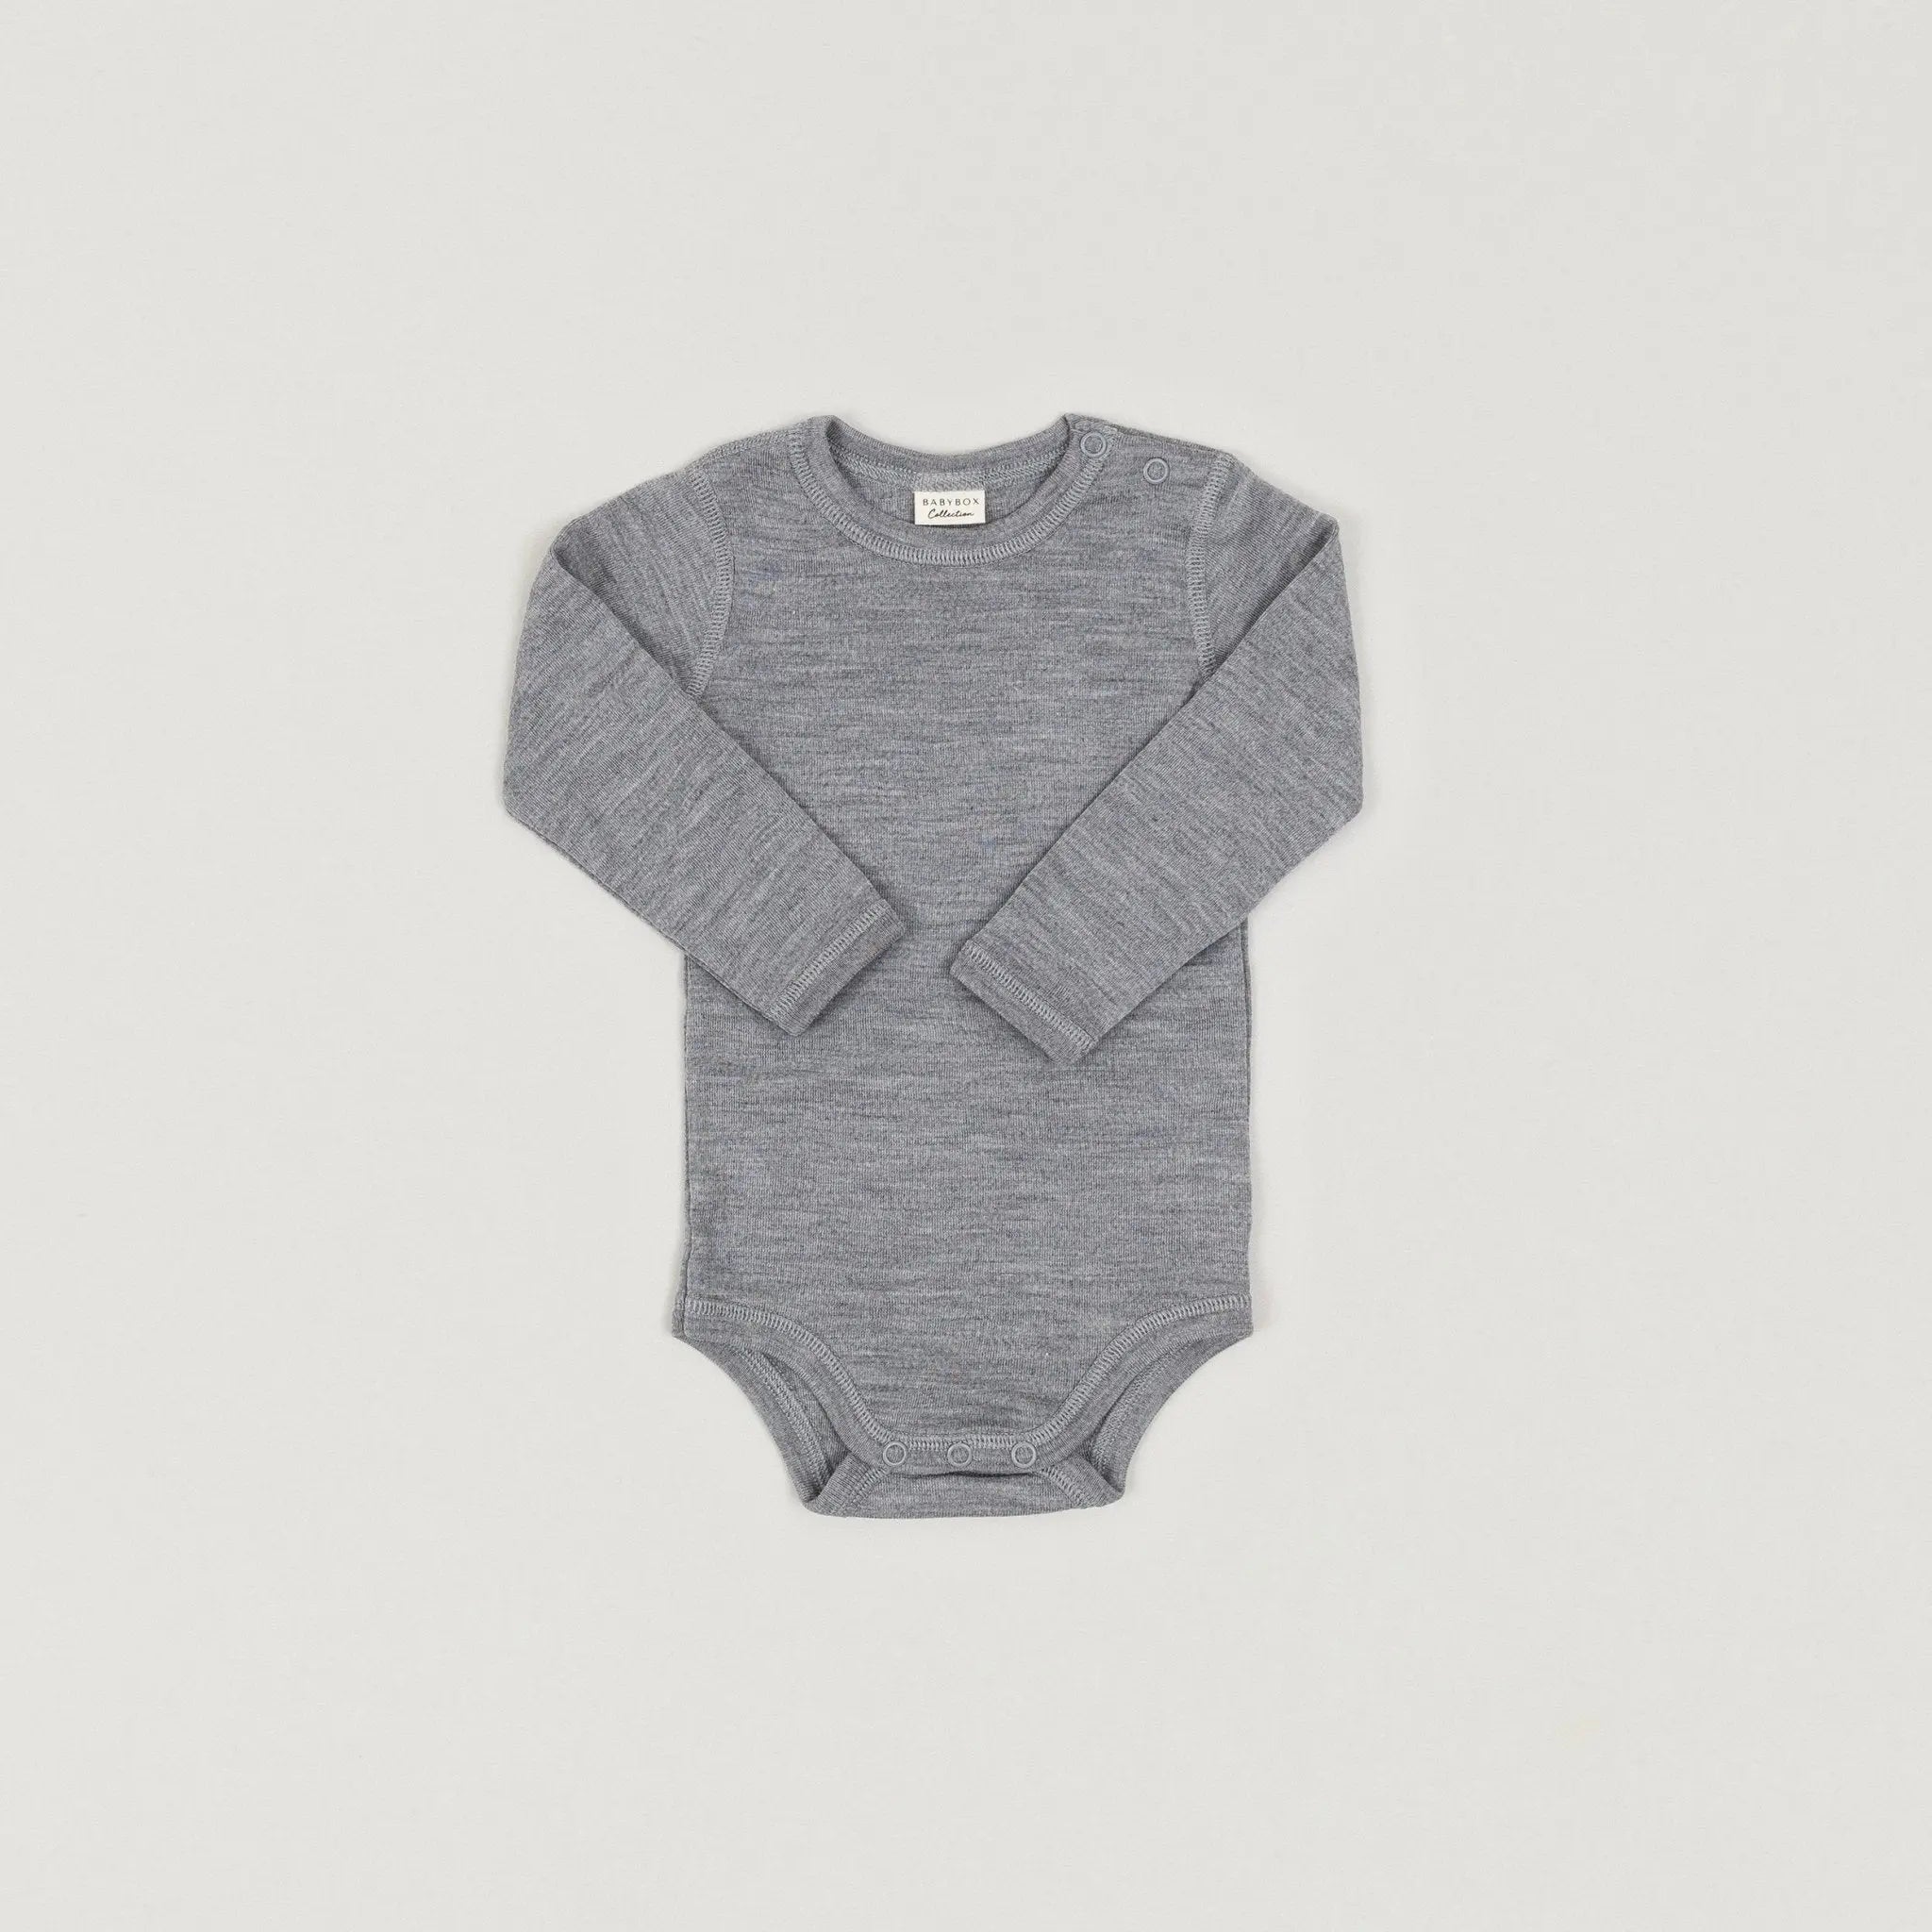 Babybox and Family BabyBox Collection Body aus Wolle & Seide 68/74 light-grey-melange-bbcws #farbe_68/74